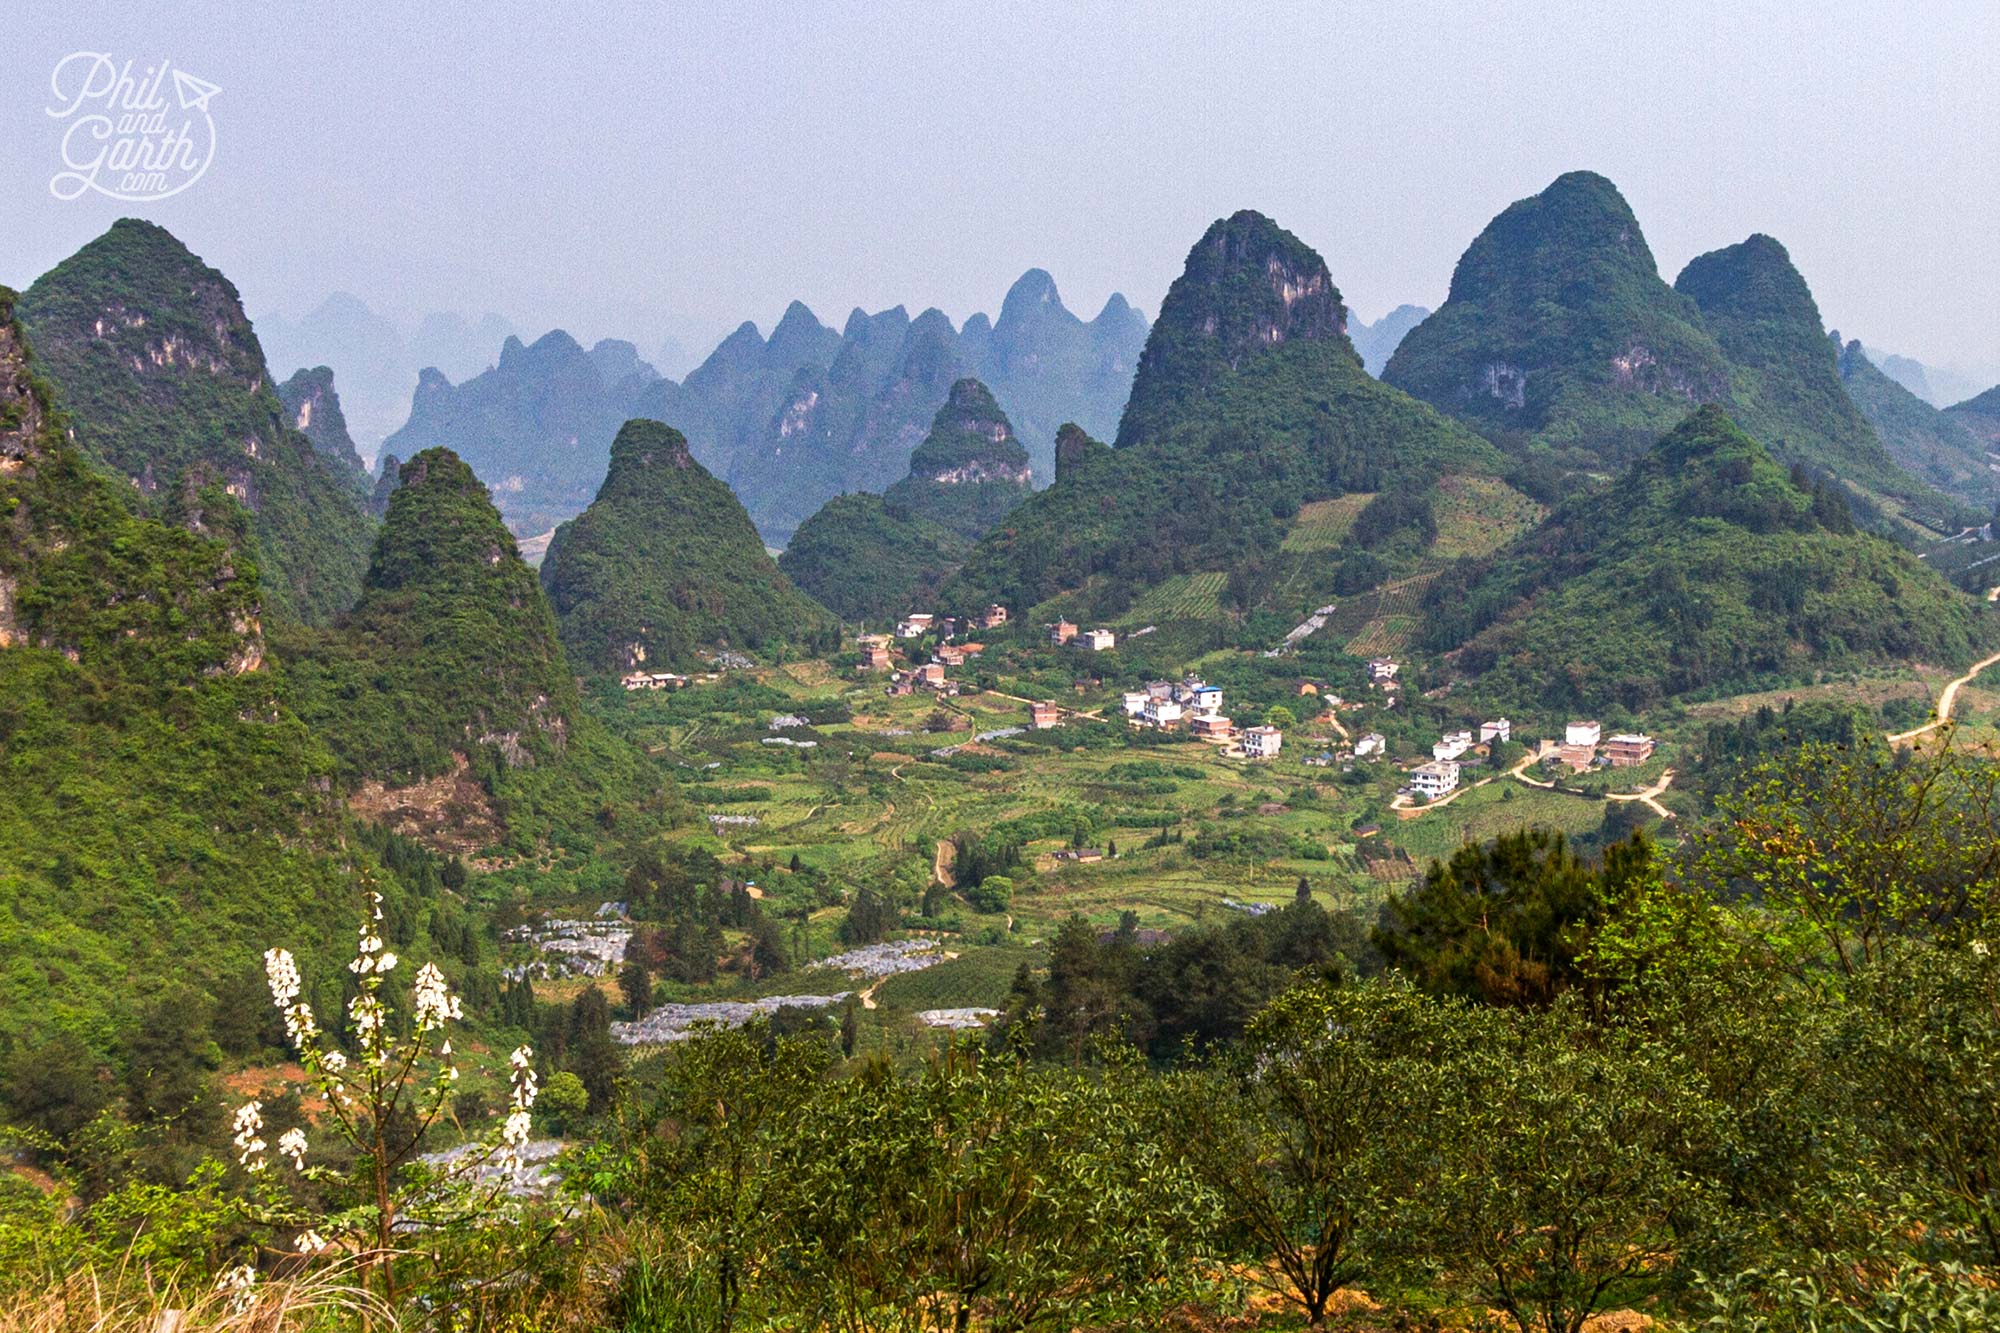 A short drive from Yangshou and we're in the countryside with epic views! wow!